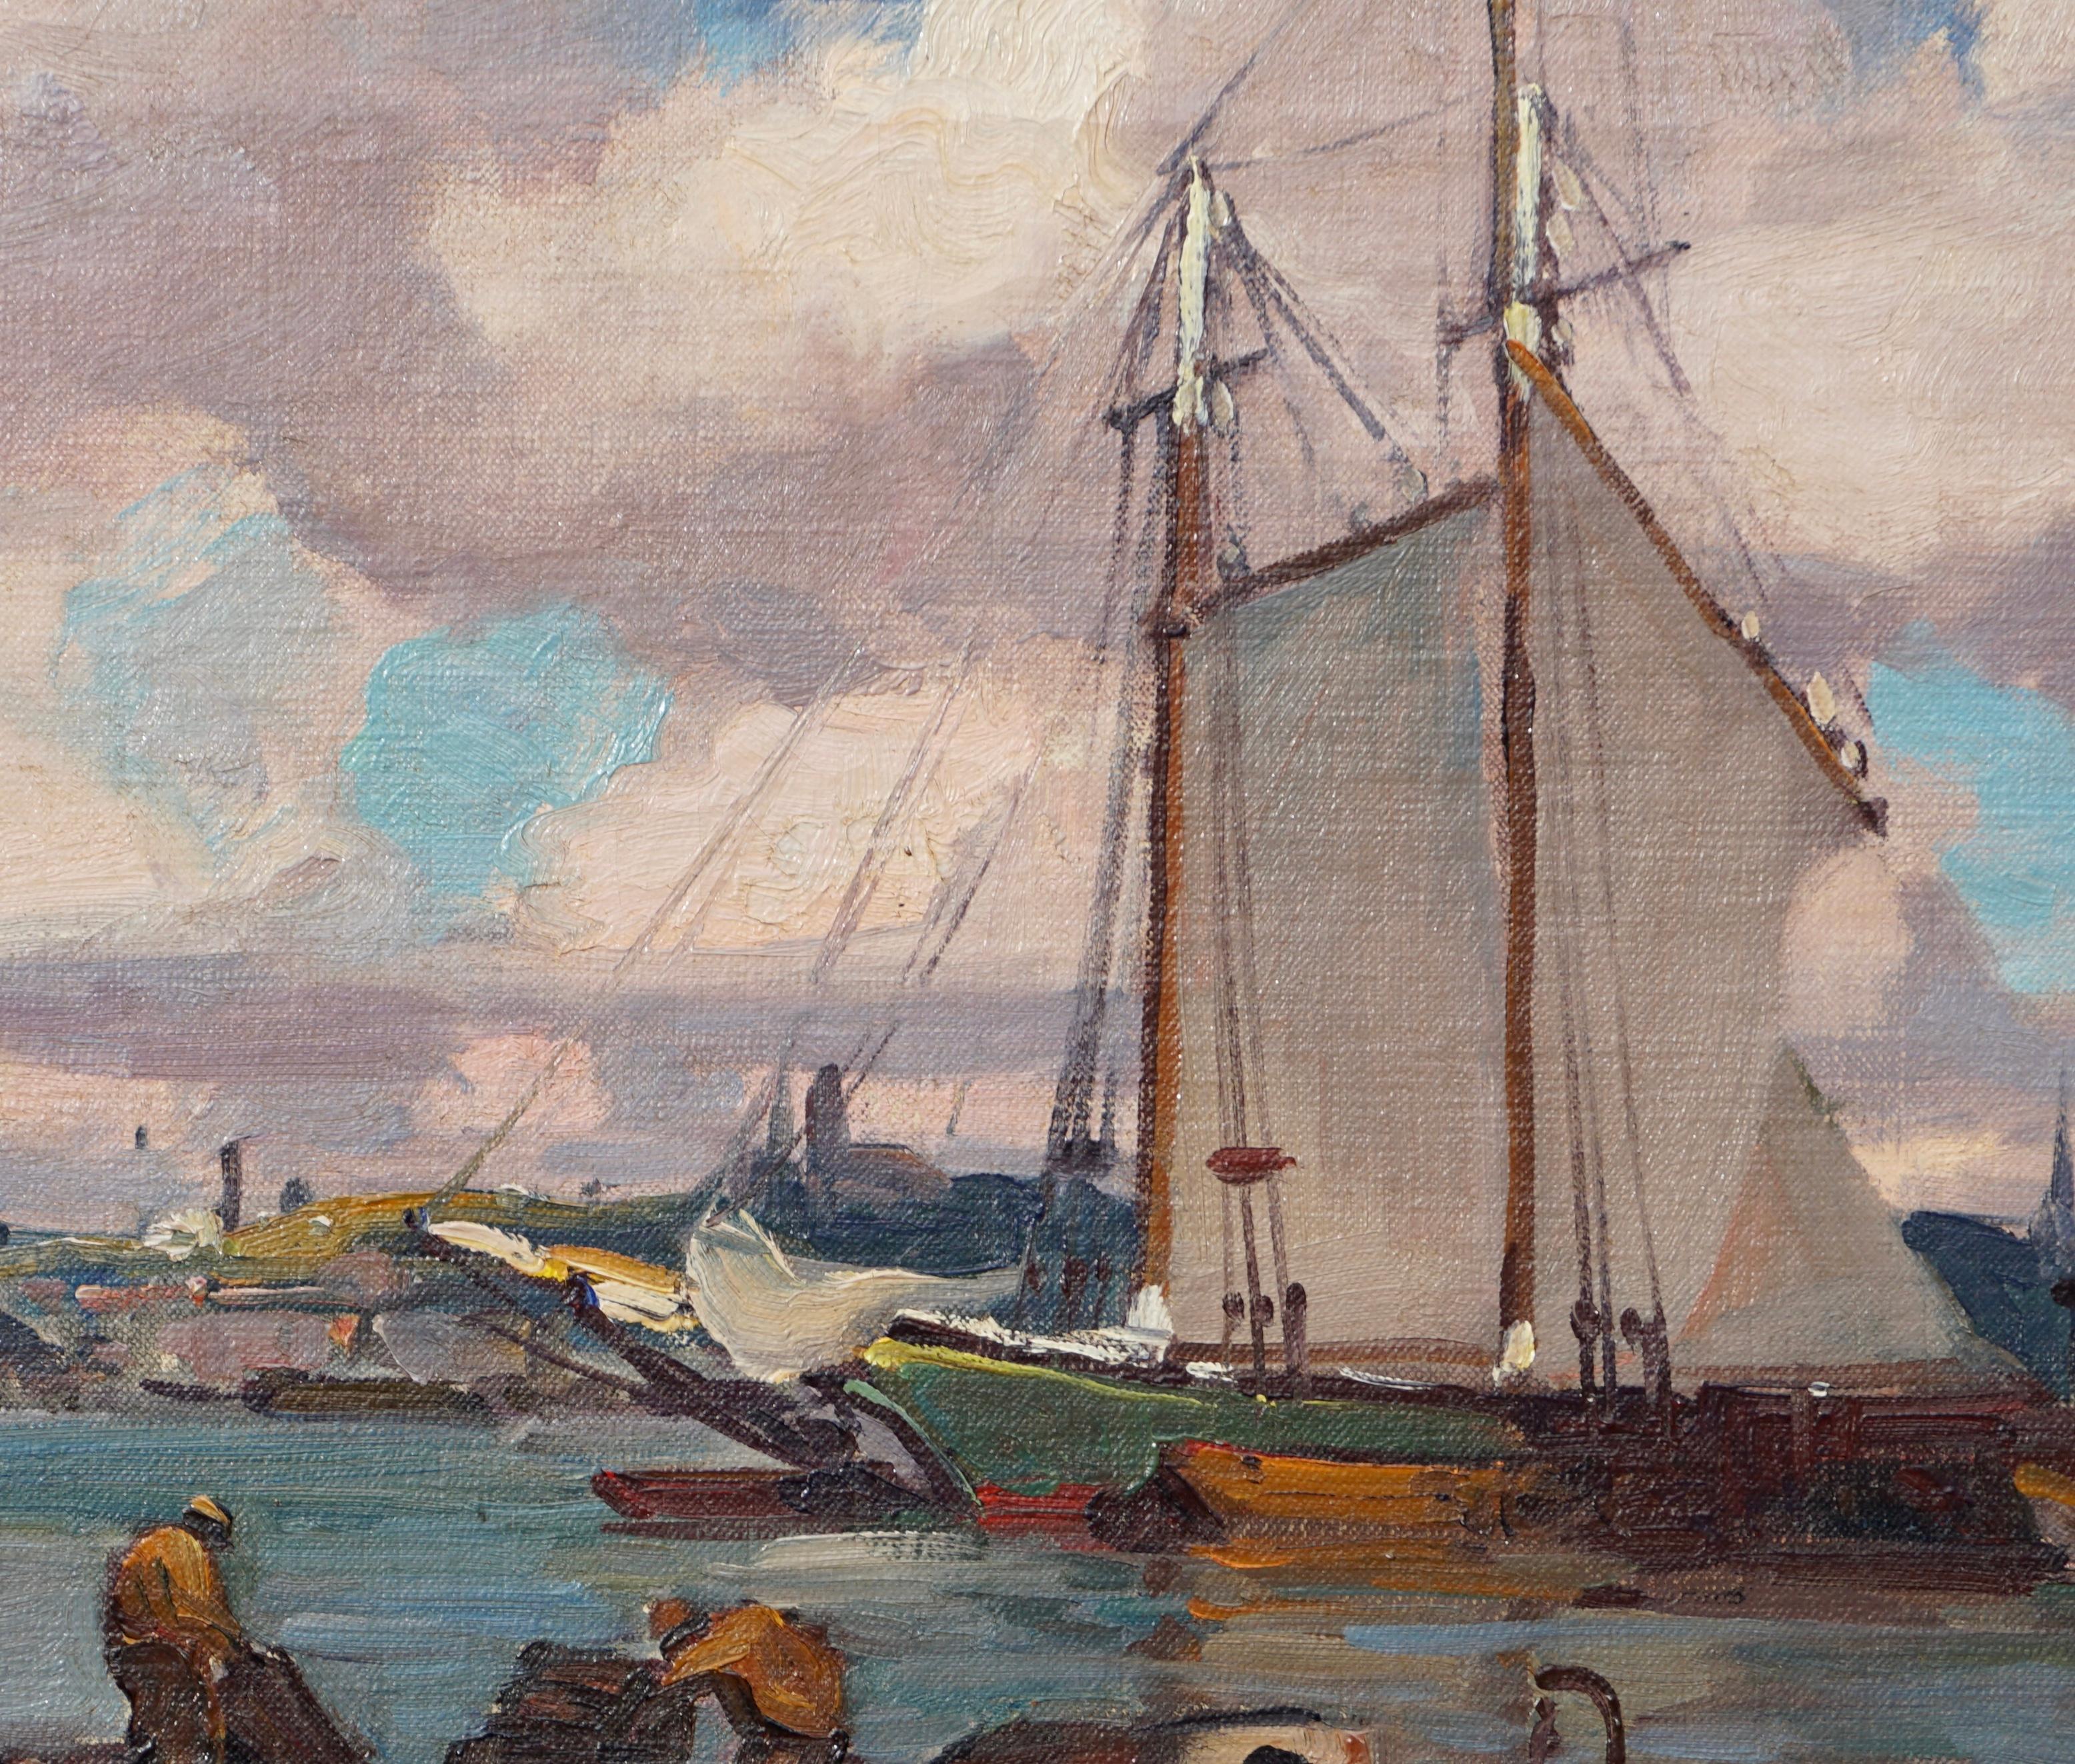 Hand-Painted Emile Albert Gruppe “Drying Sails at Gloucester Harbor”